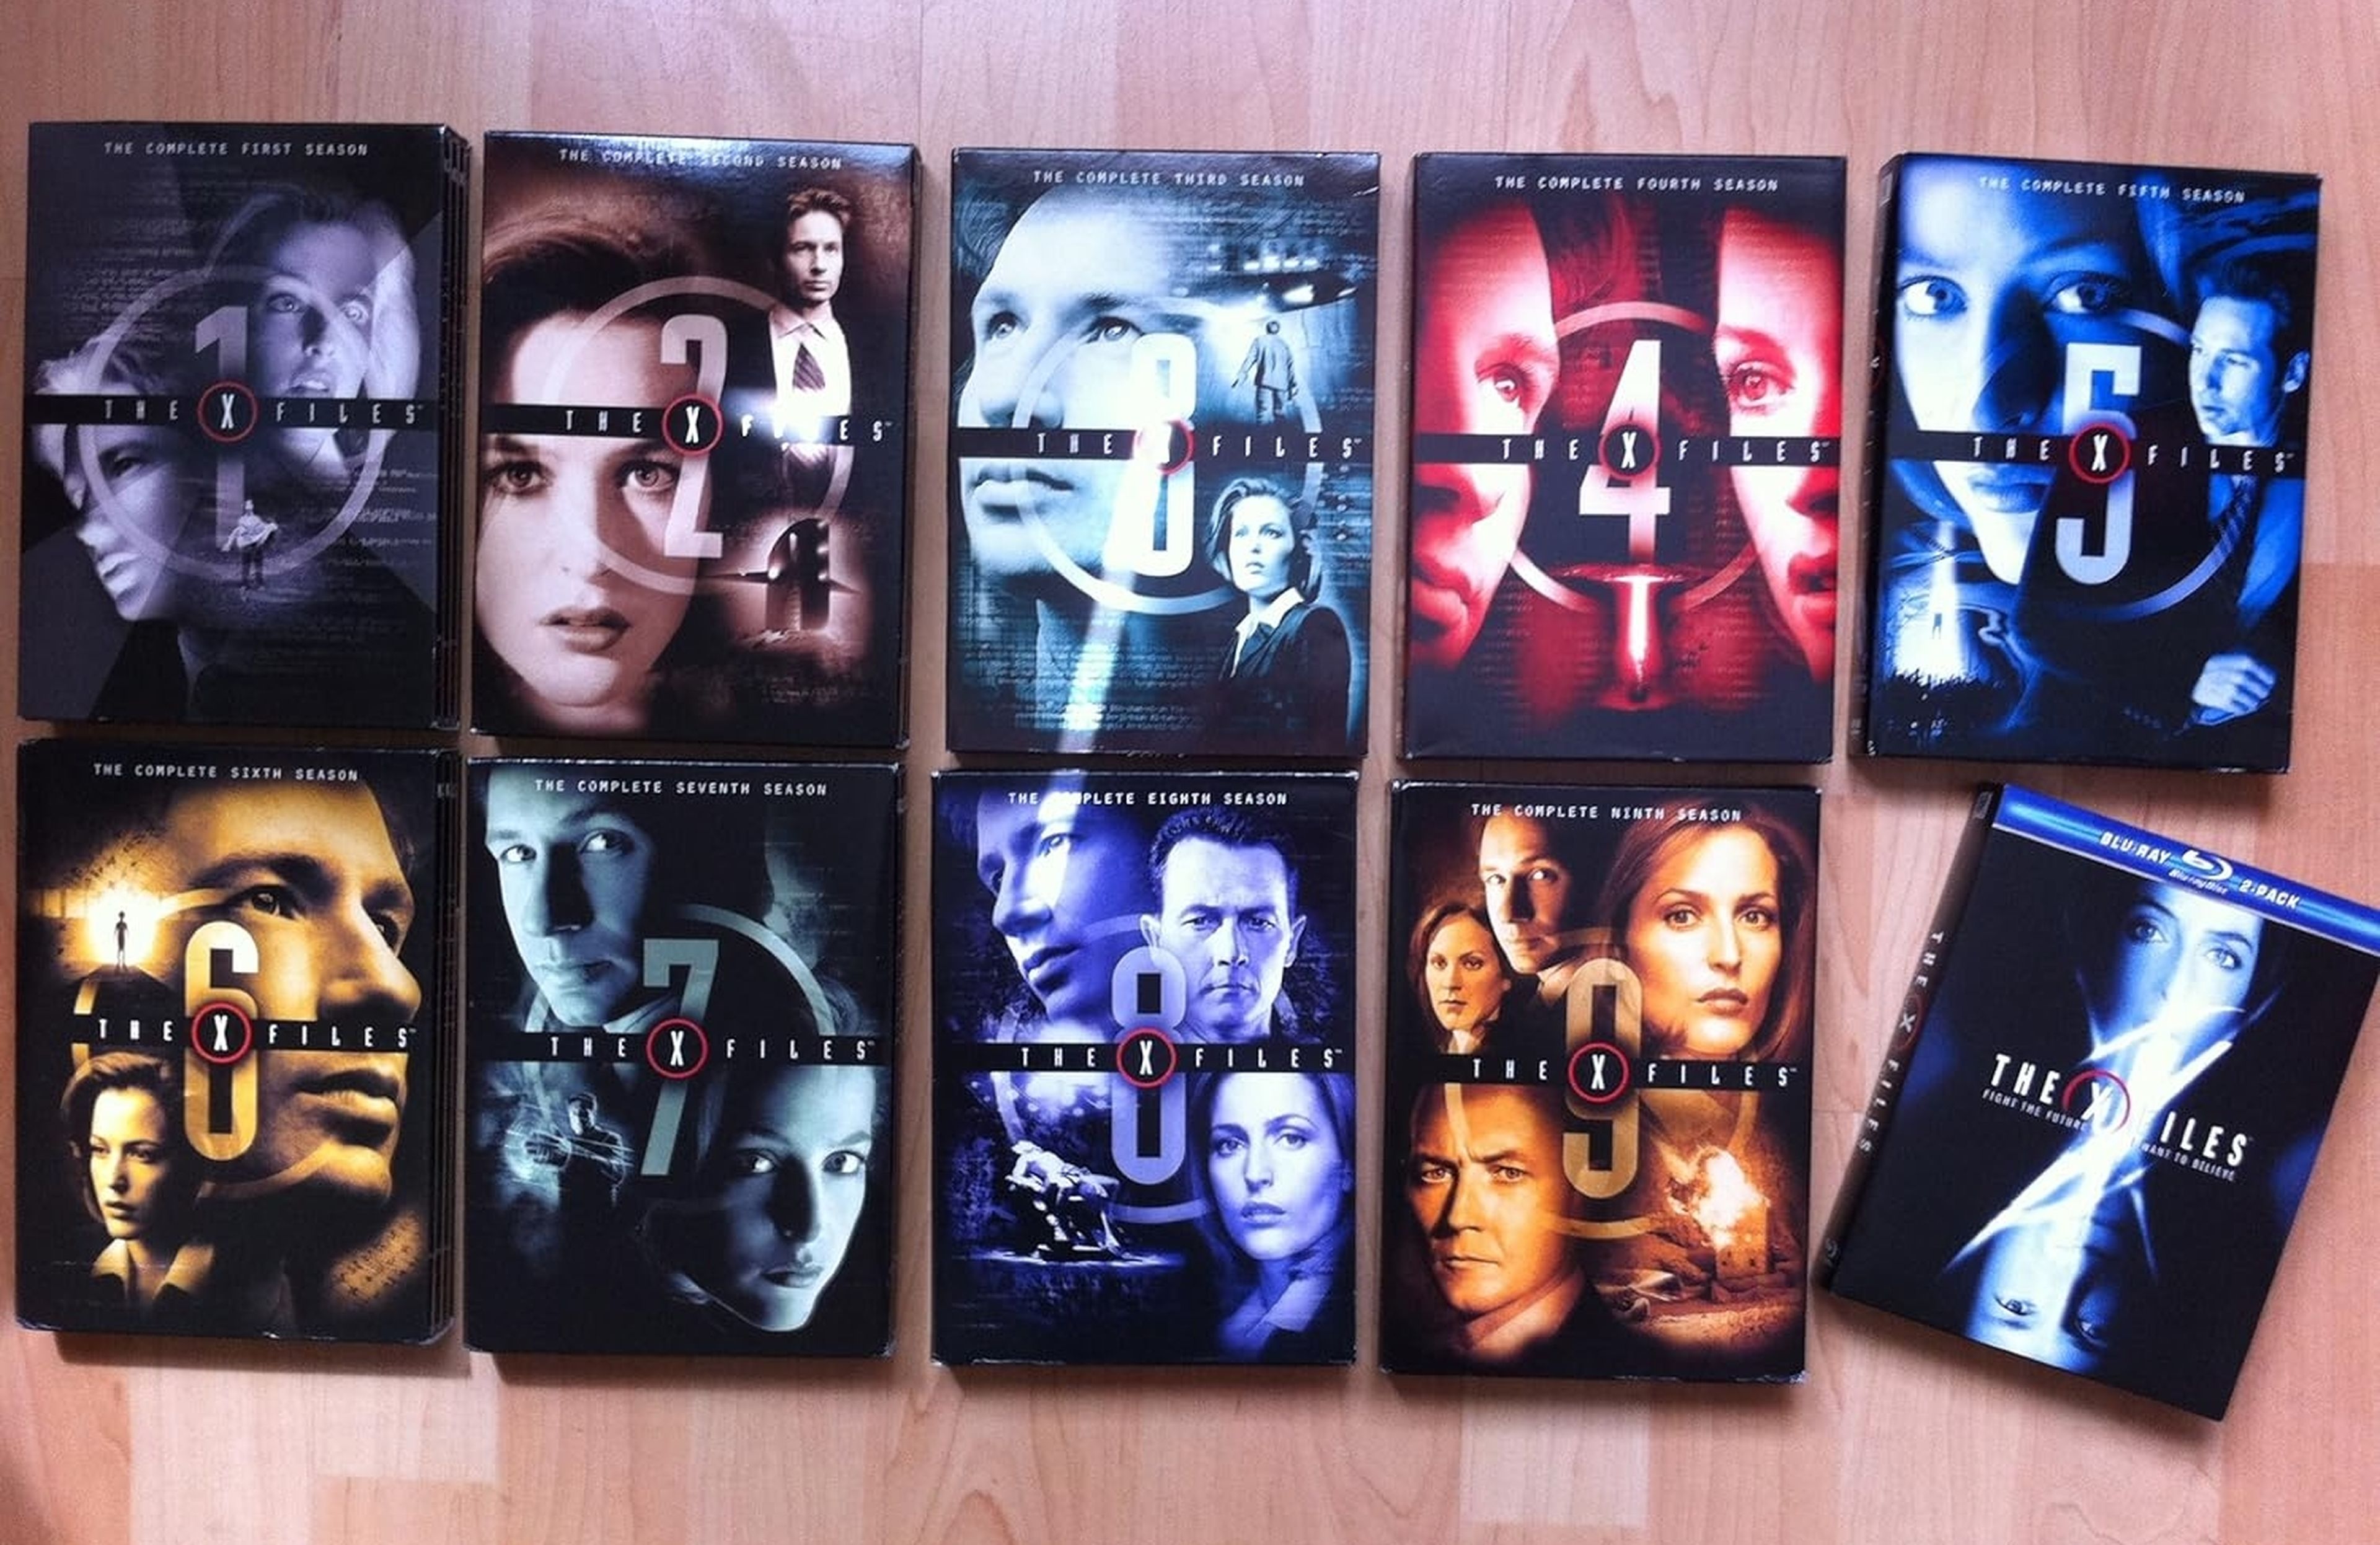 The X-Files on DVD